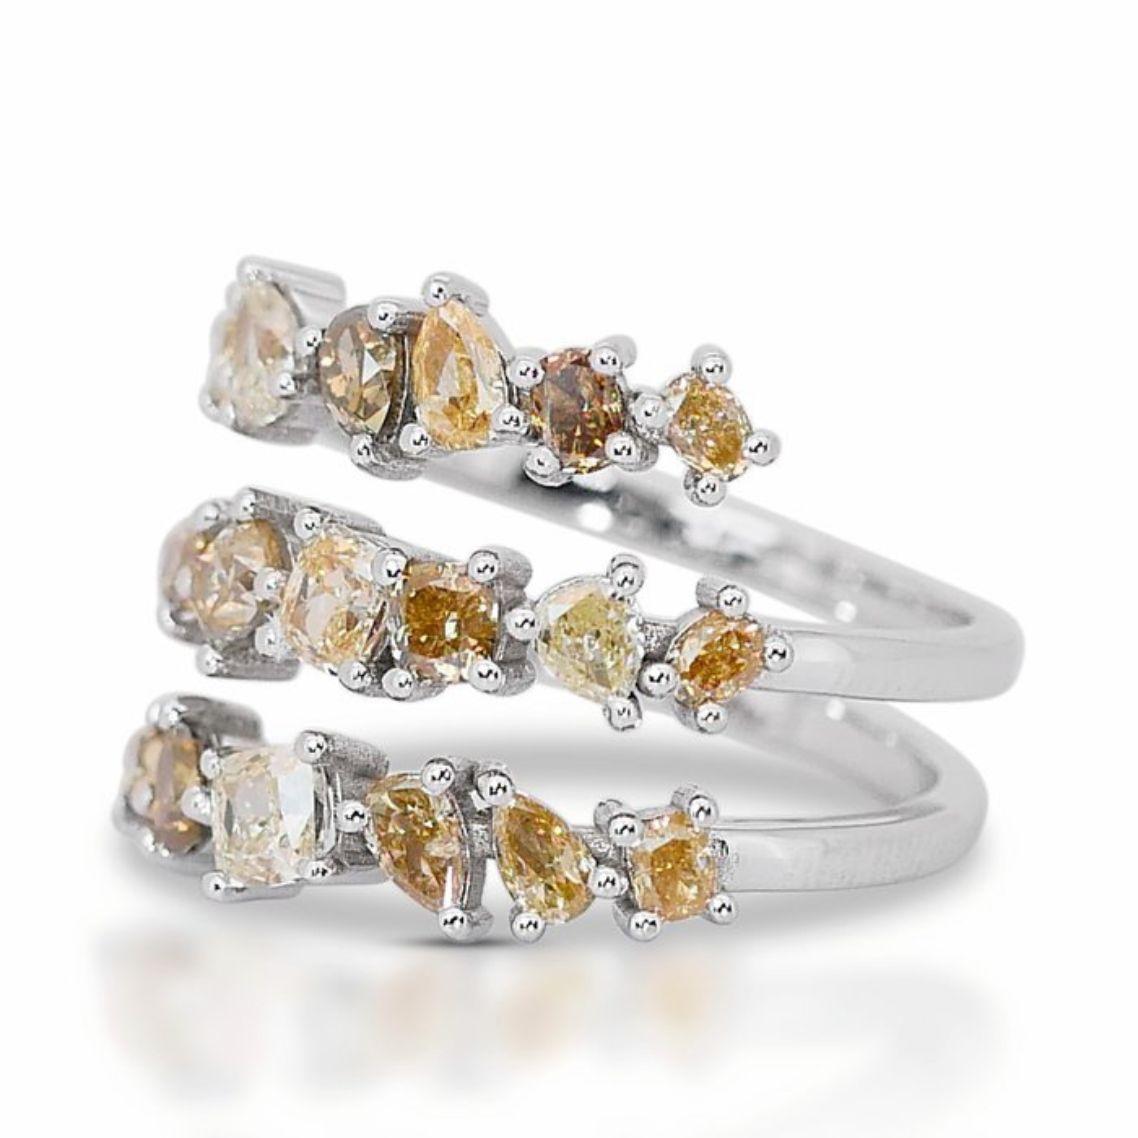 This captivating ring isn't just a piece of jewelry; it's a vibrant celebration of color and unique beauty. As the centerpiece, seven mesmerizing cushion-cut diamonds, totaling 1.3 carats, captivate your gaze with their light yellow warmth. The